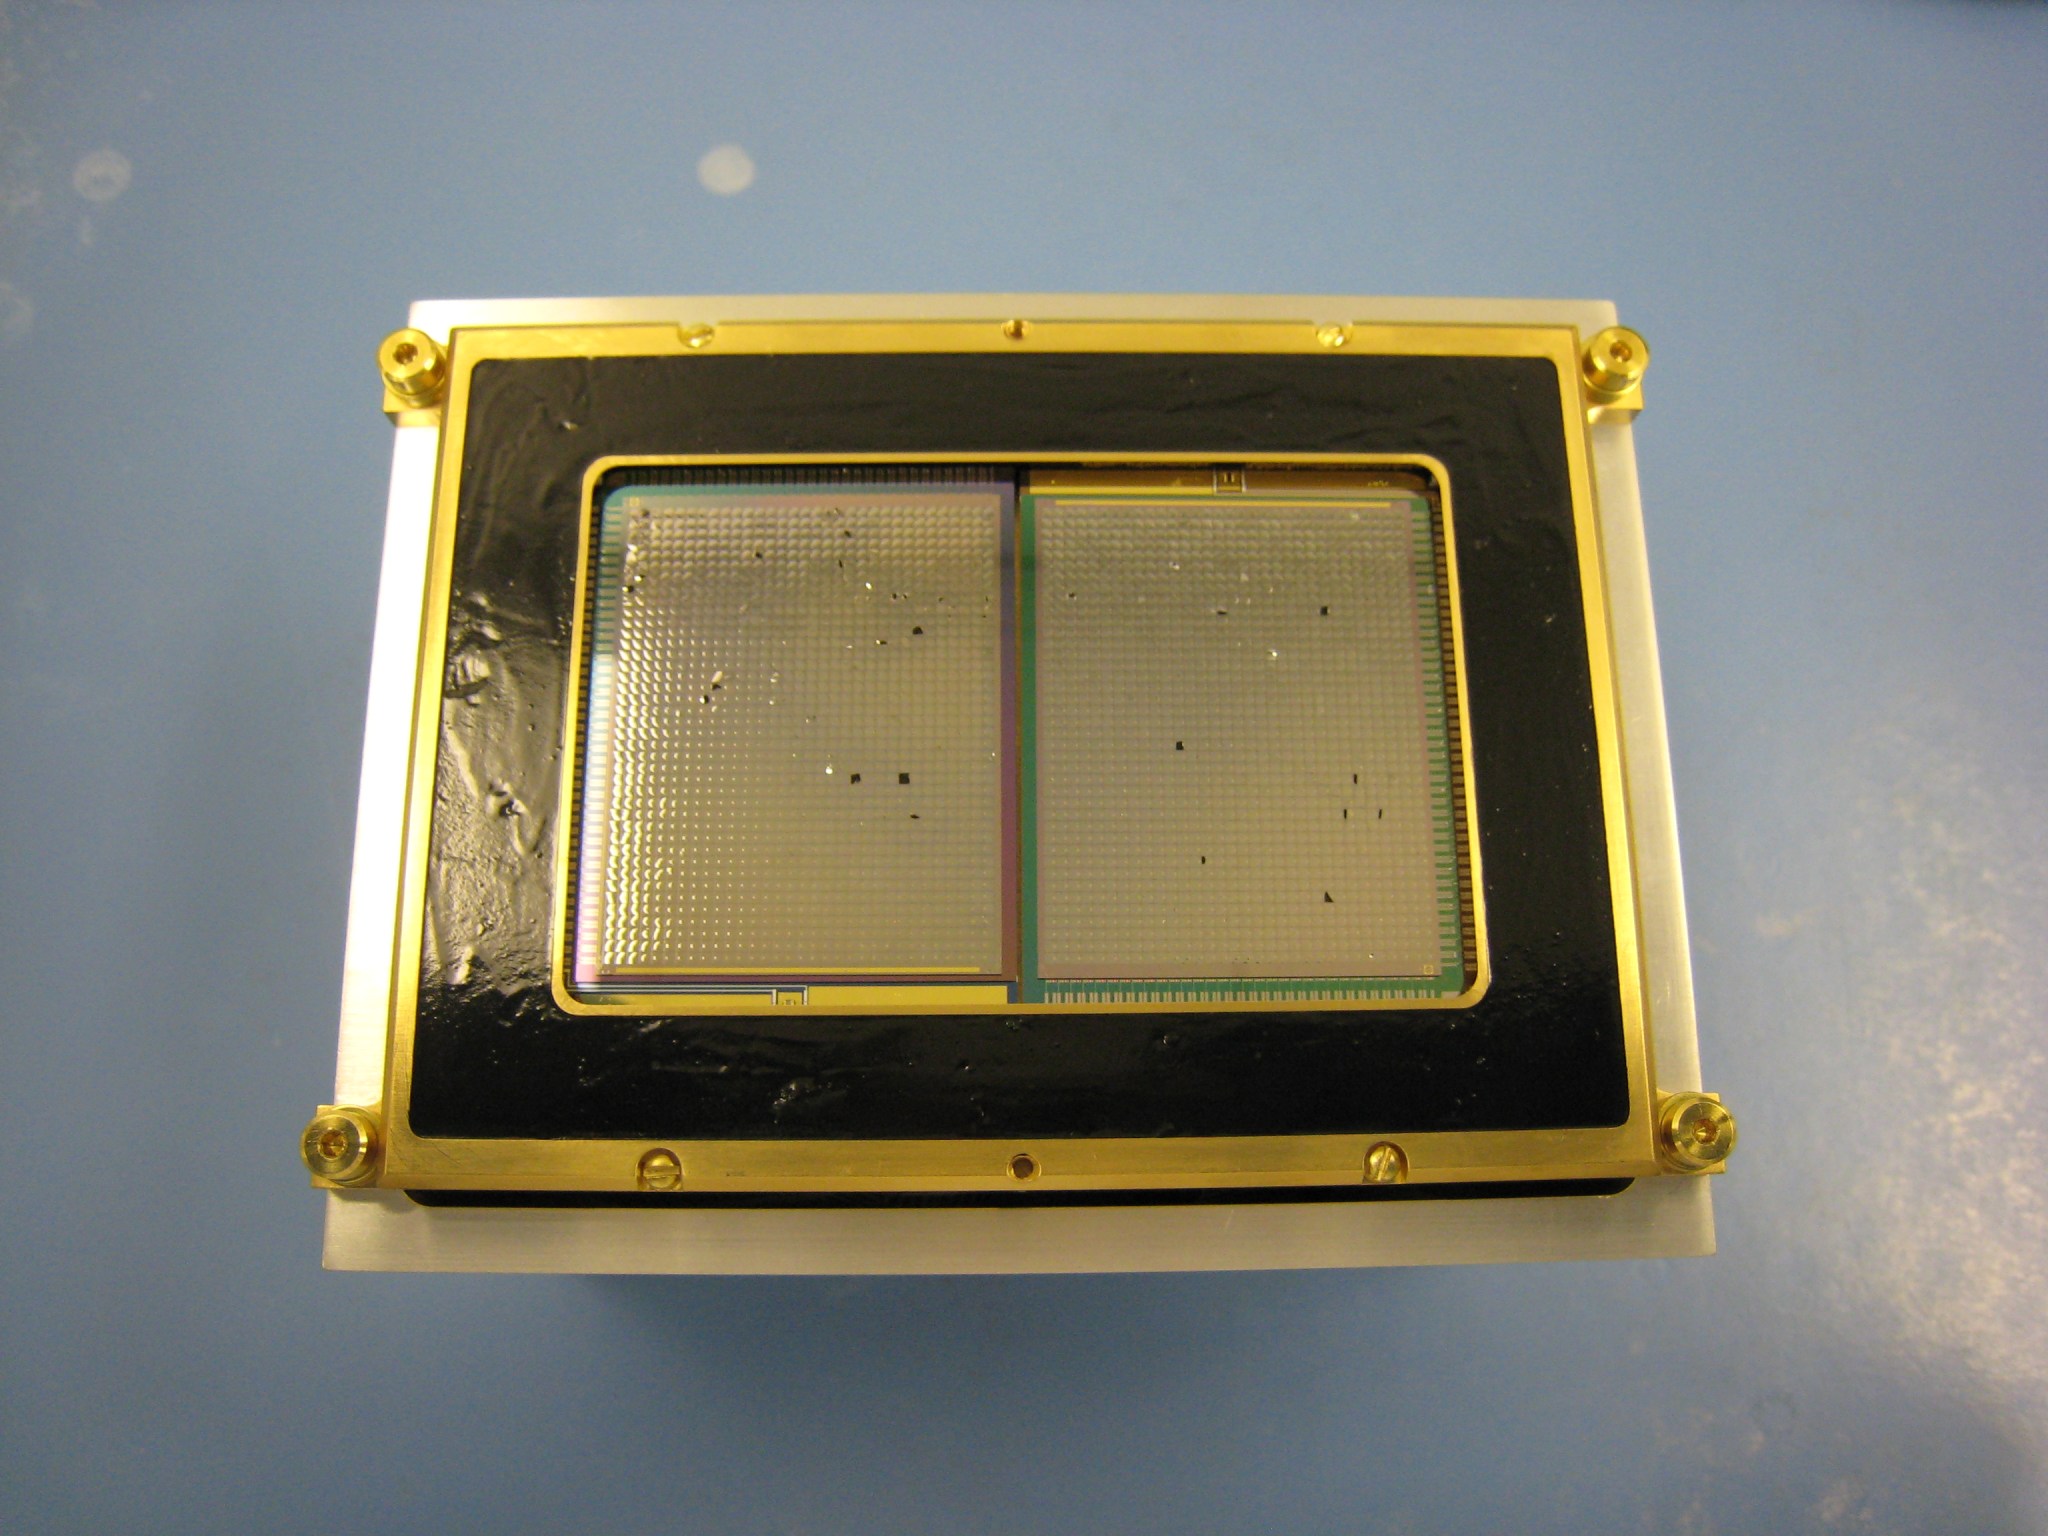 A small metal frame, with a black outline. Inside the frame, a grid is made of thin gold material.